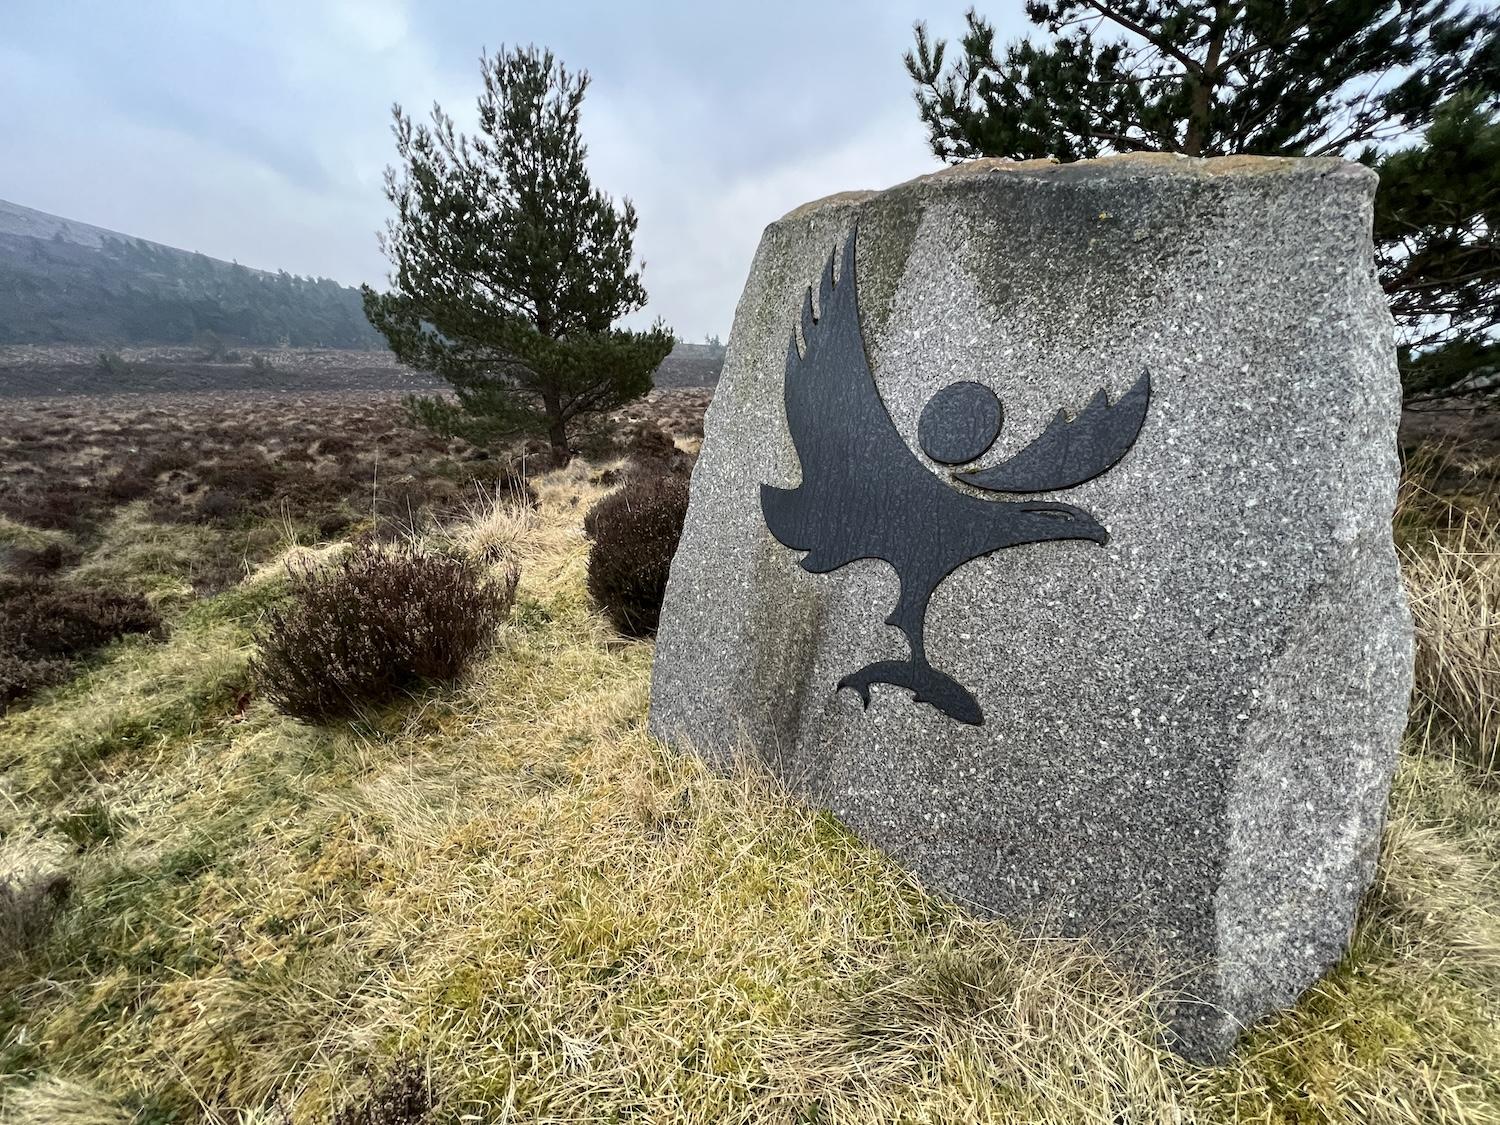 A stone showing an osprey and fish marks the border of Cairngorms National Park in Scotland.